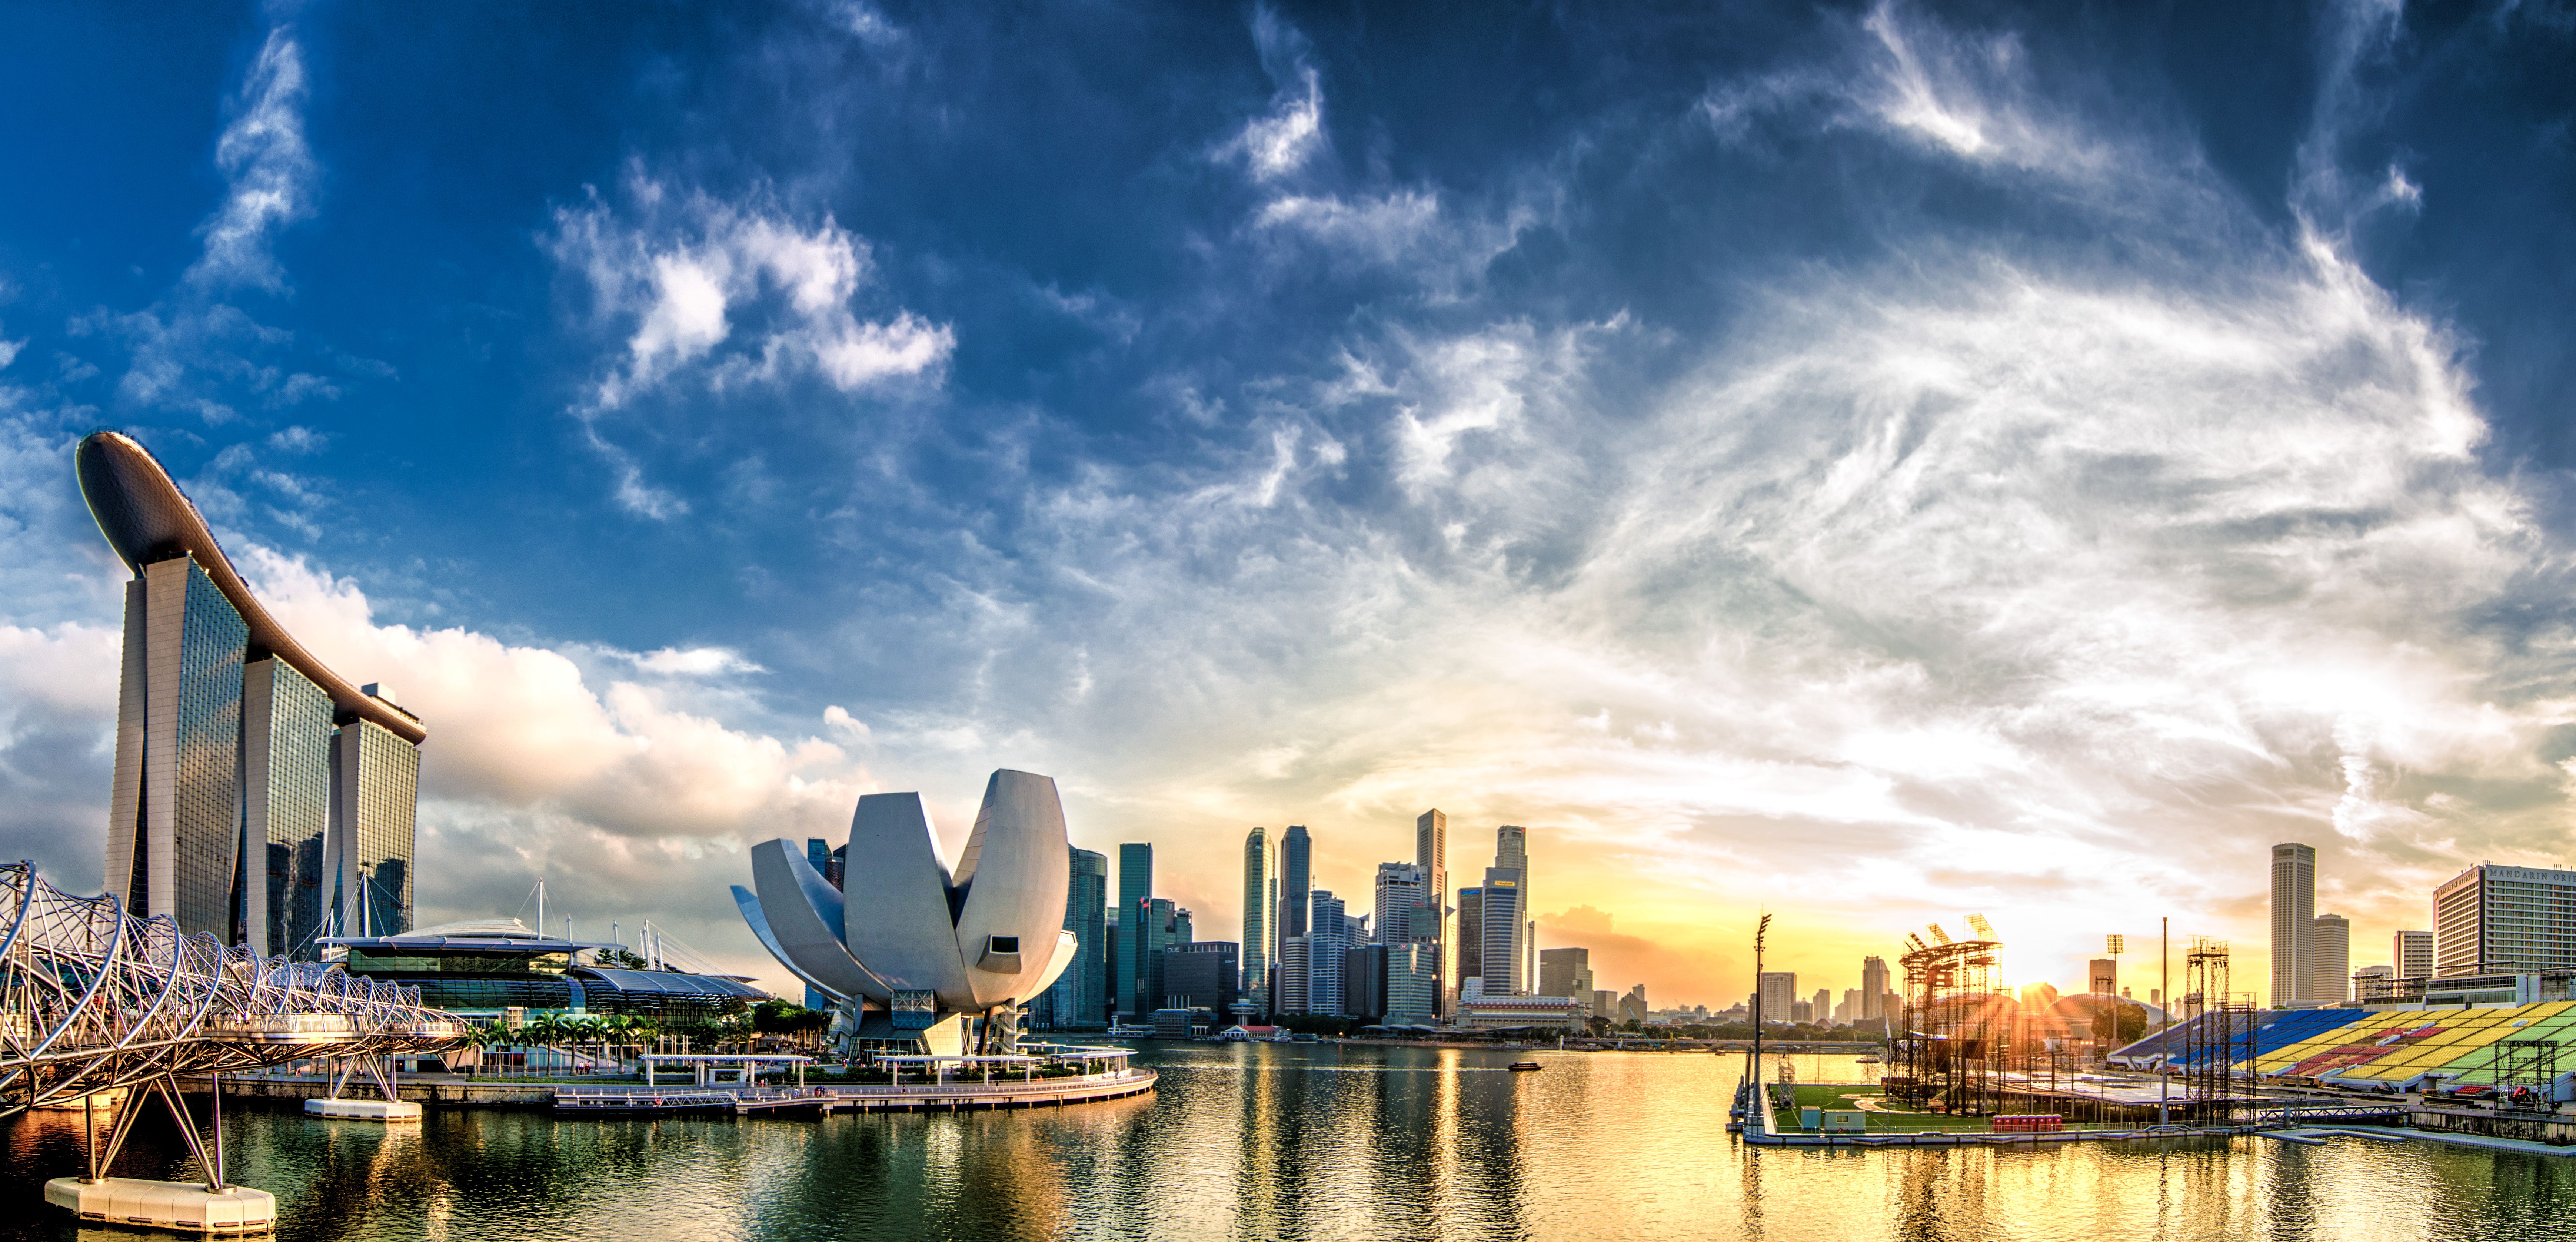 42+ Singapore Wallpapers: HD, 4K, 5K for PC and Mobile | Download free  images for iPhone, Android